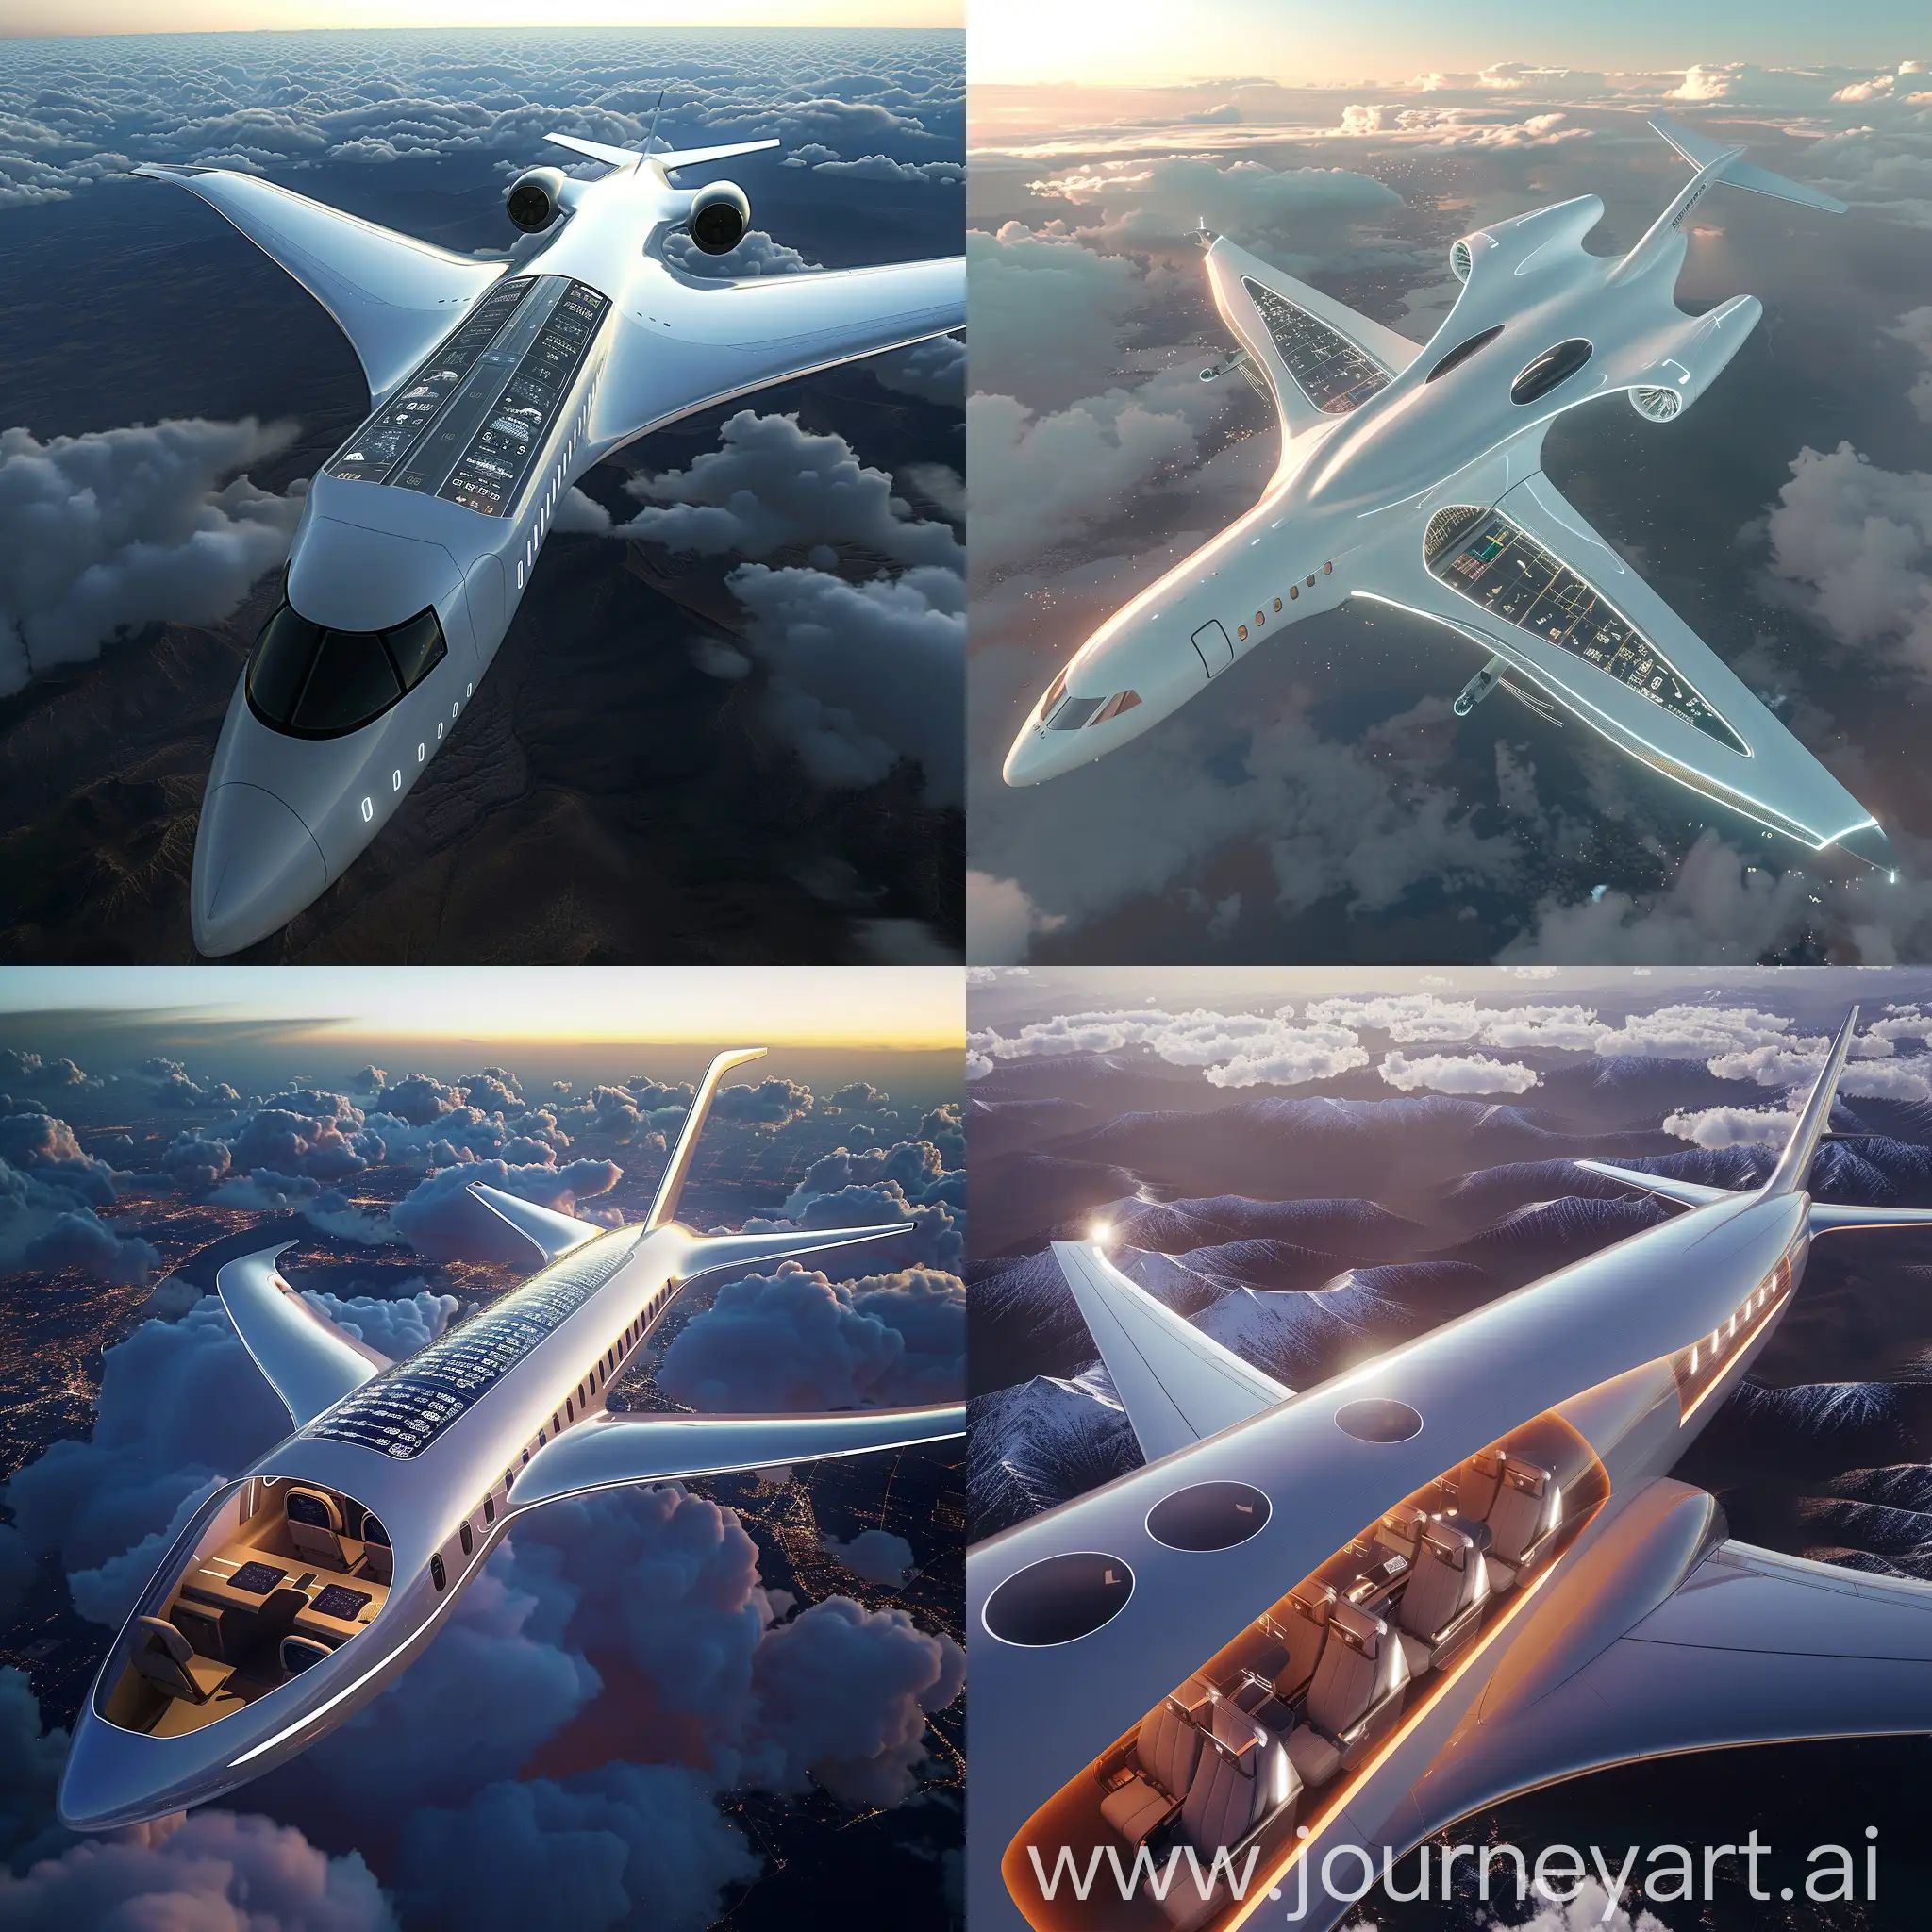 Futuristic-Passenger-Aircraft-with-VR-Entertainment-Systems-and-Biometric-Authentication